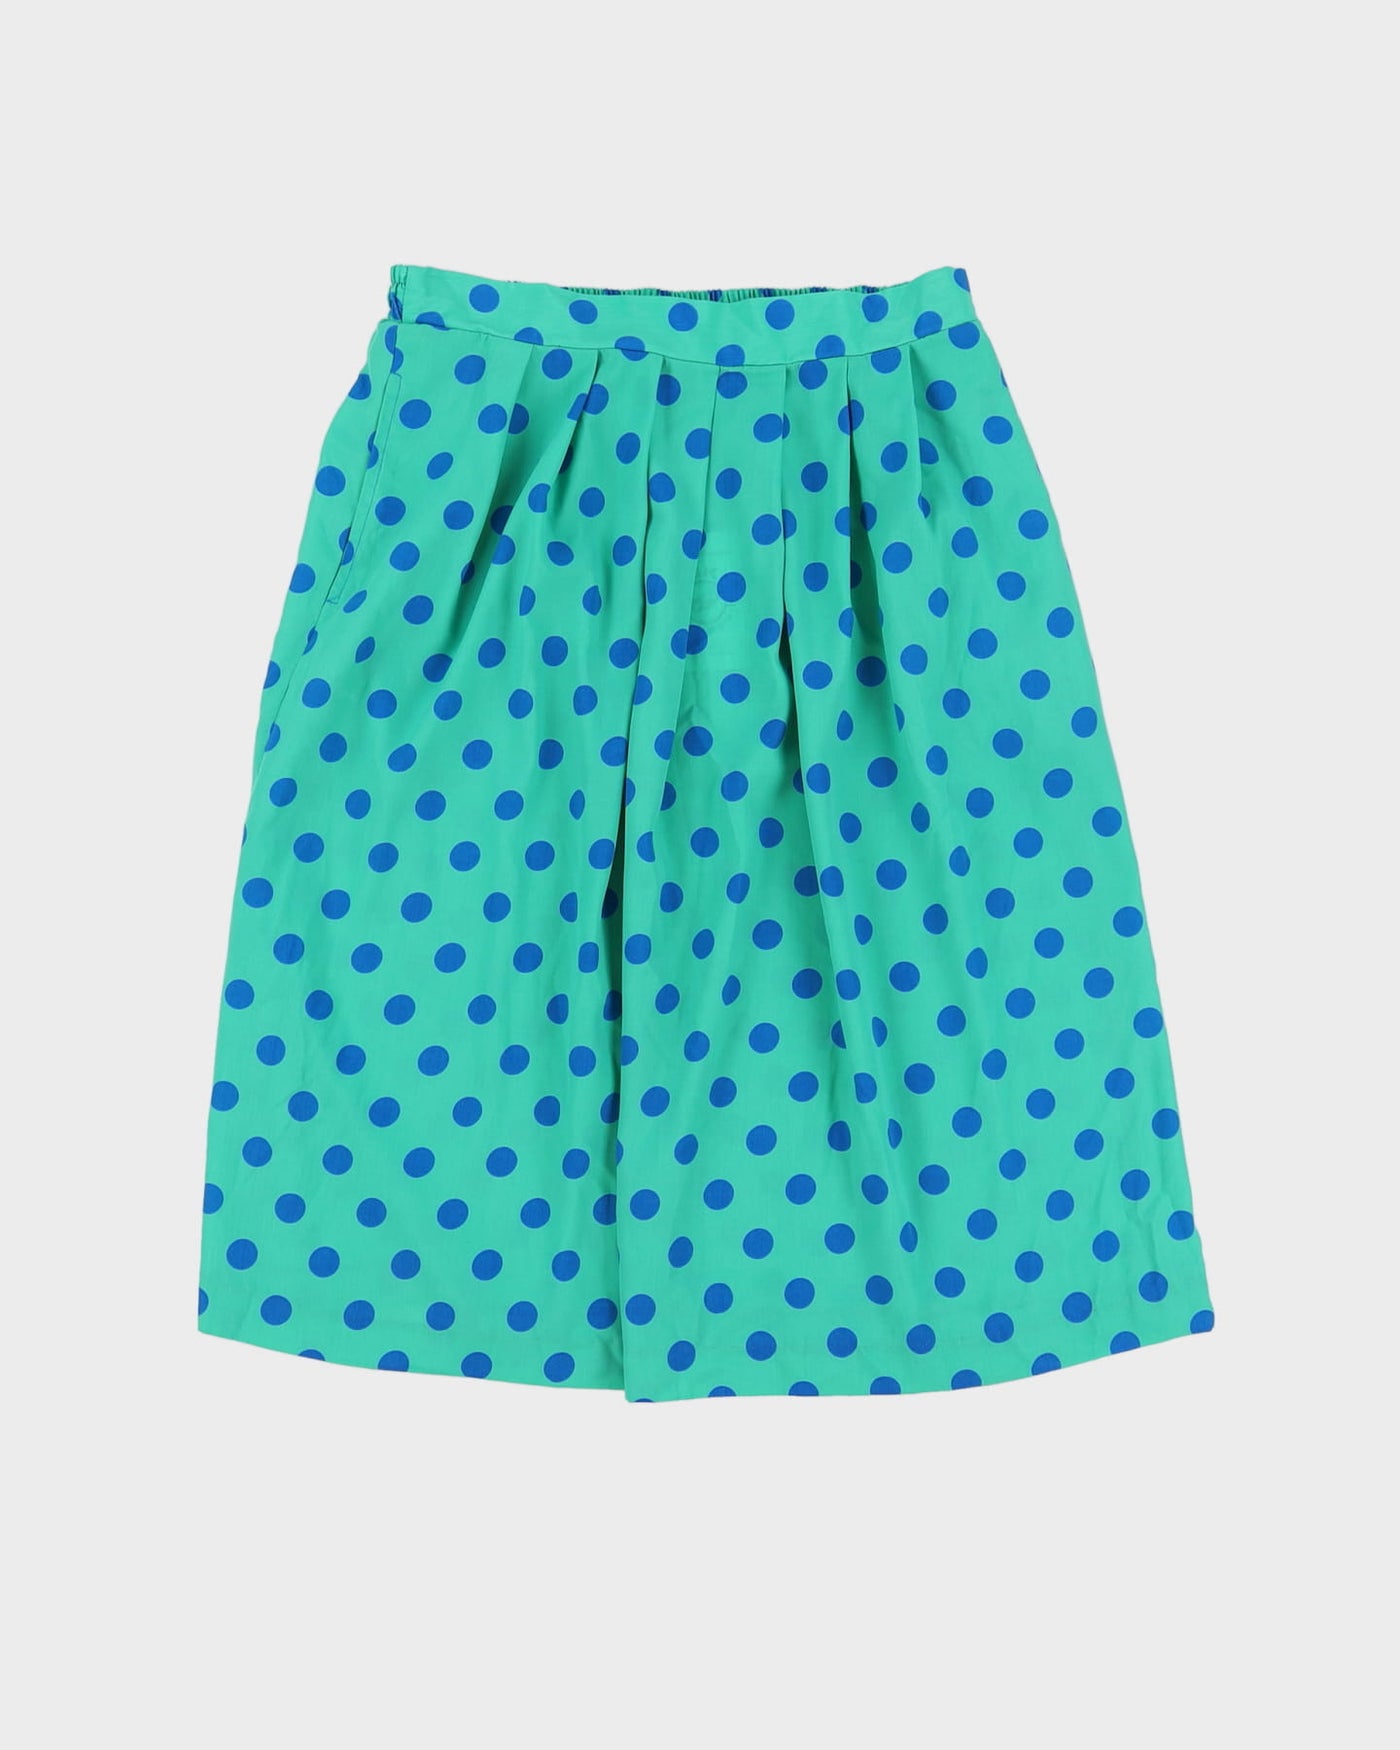 00s Green Patterned Jacket And Skirt Suit - M